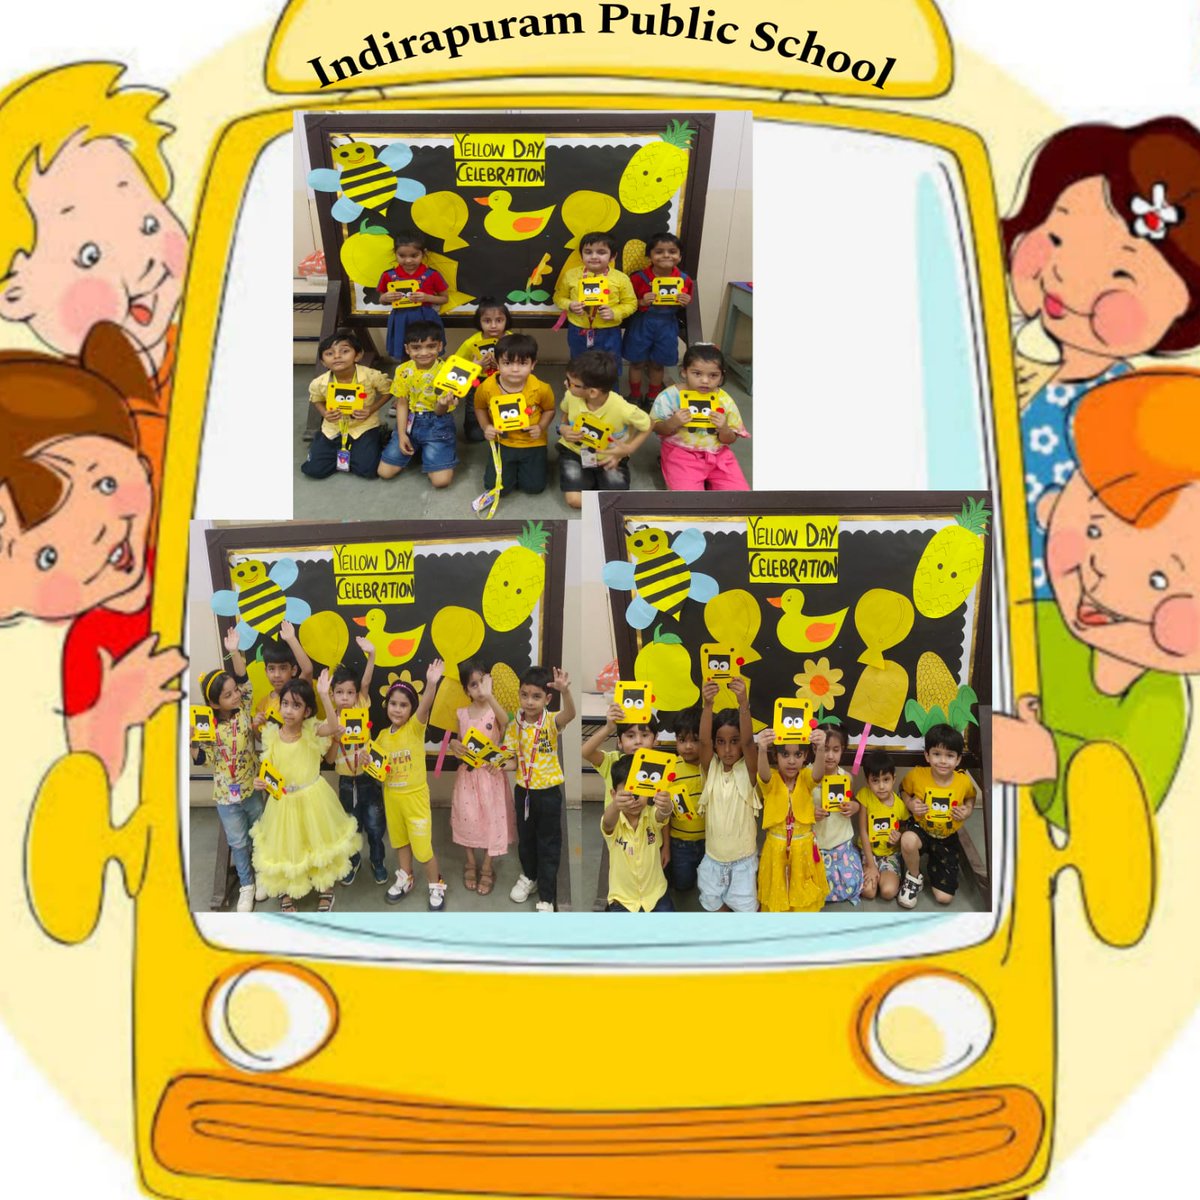 The Pre-Primary Wing at IPS, PV, celebrated 'Yellow Colour Day' and a 'Summer Party' with vibrant yellow decorations and engaging activities. The munchkins got the opportunity to enhance their crafting skills by creating beautiful lion masks, paper rings,etc. 💛@IprmGrp